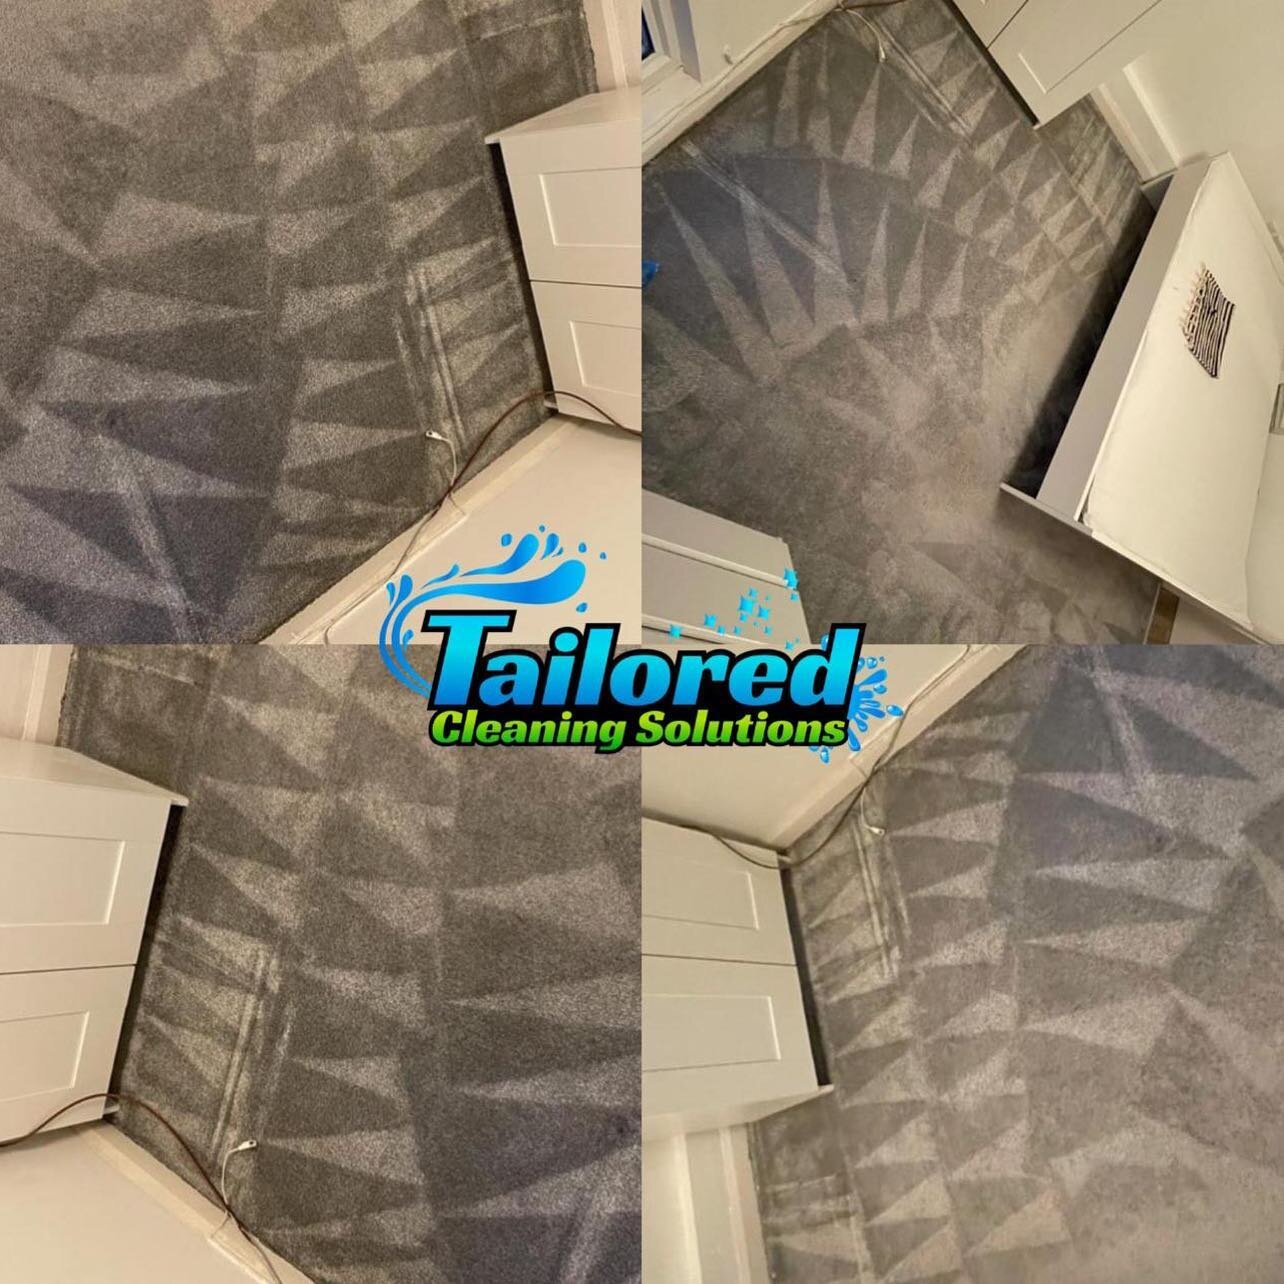 Squeaky clean carpets this Sunday. These carpets were fairly new and didn&rsquo;t appear too dirty but the state of the water speaks for itself. Don&rsquo;t just sweep it under the carpet, book us in for a deep clean ASAP! 💙
________________________